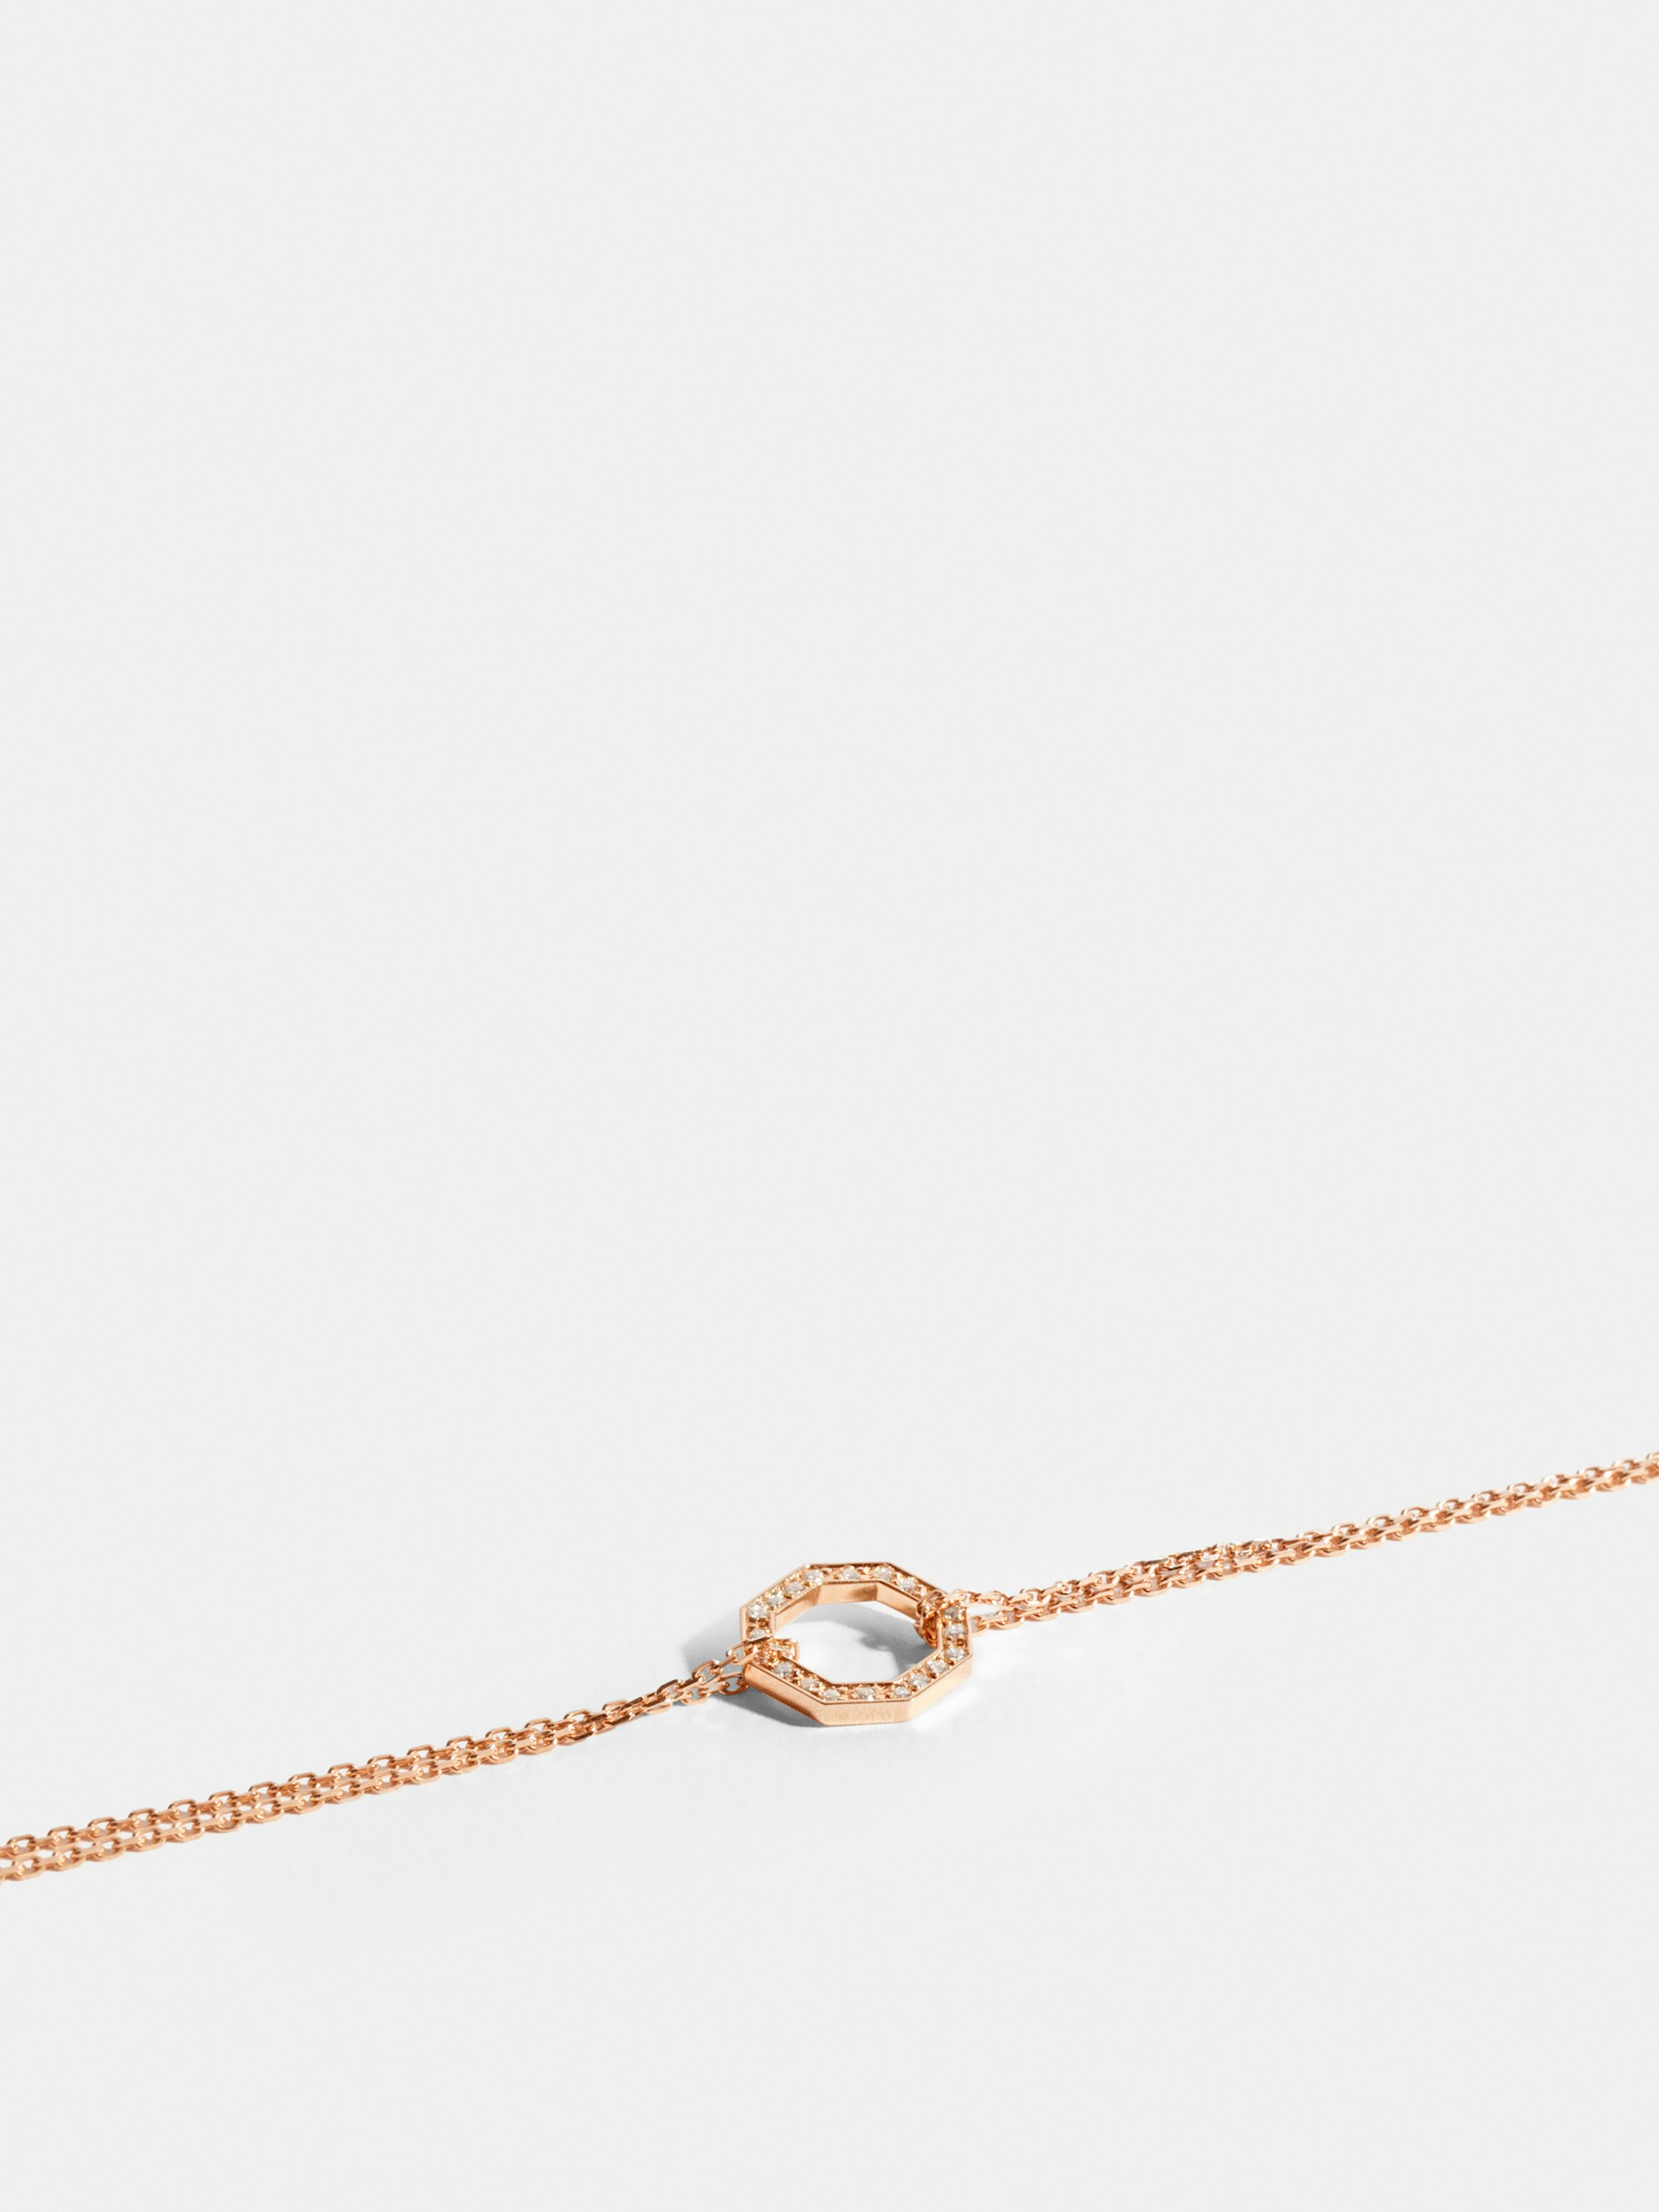 Octogone motif in 18k Fairmined ethical rose gold, paved with lab-grown diamonds, on a chain.